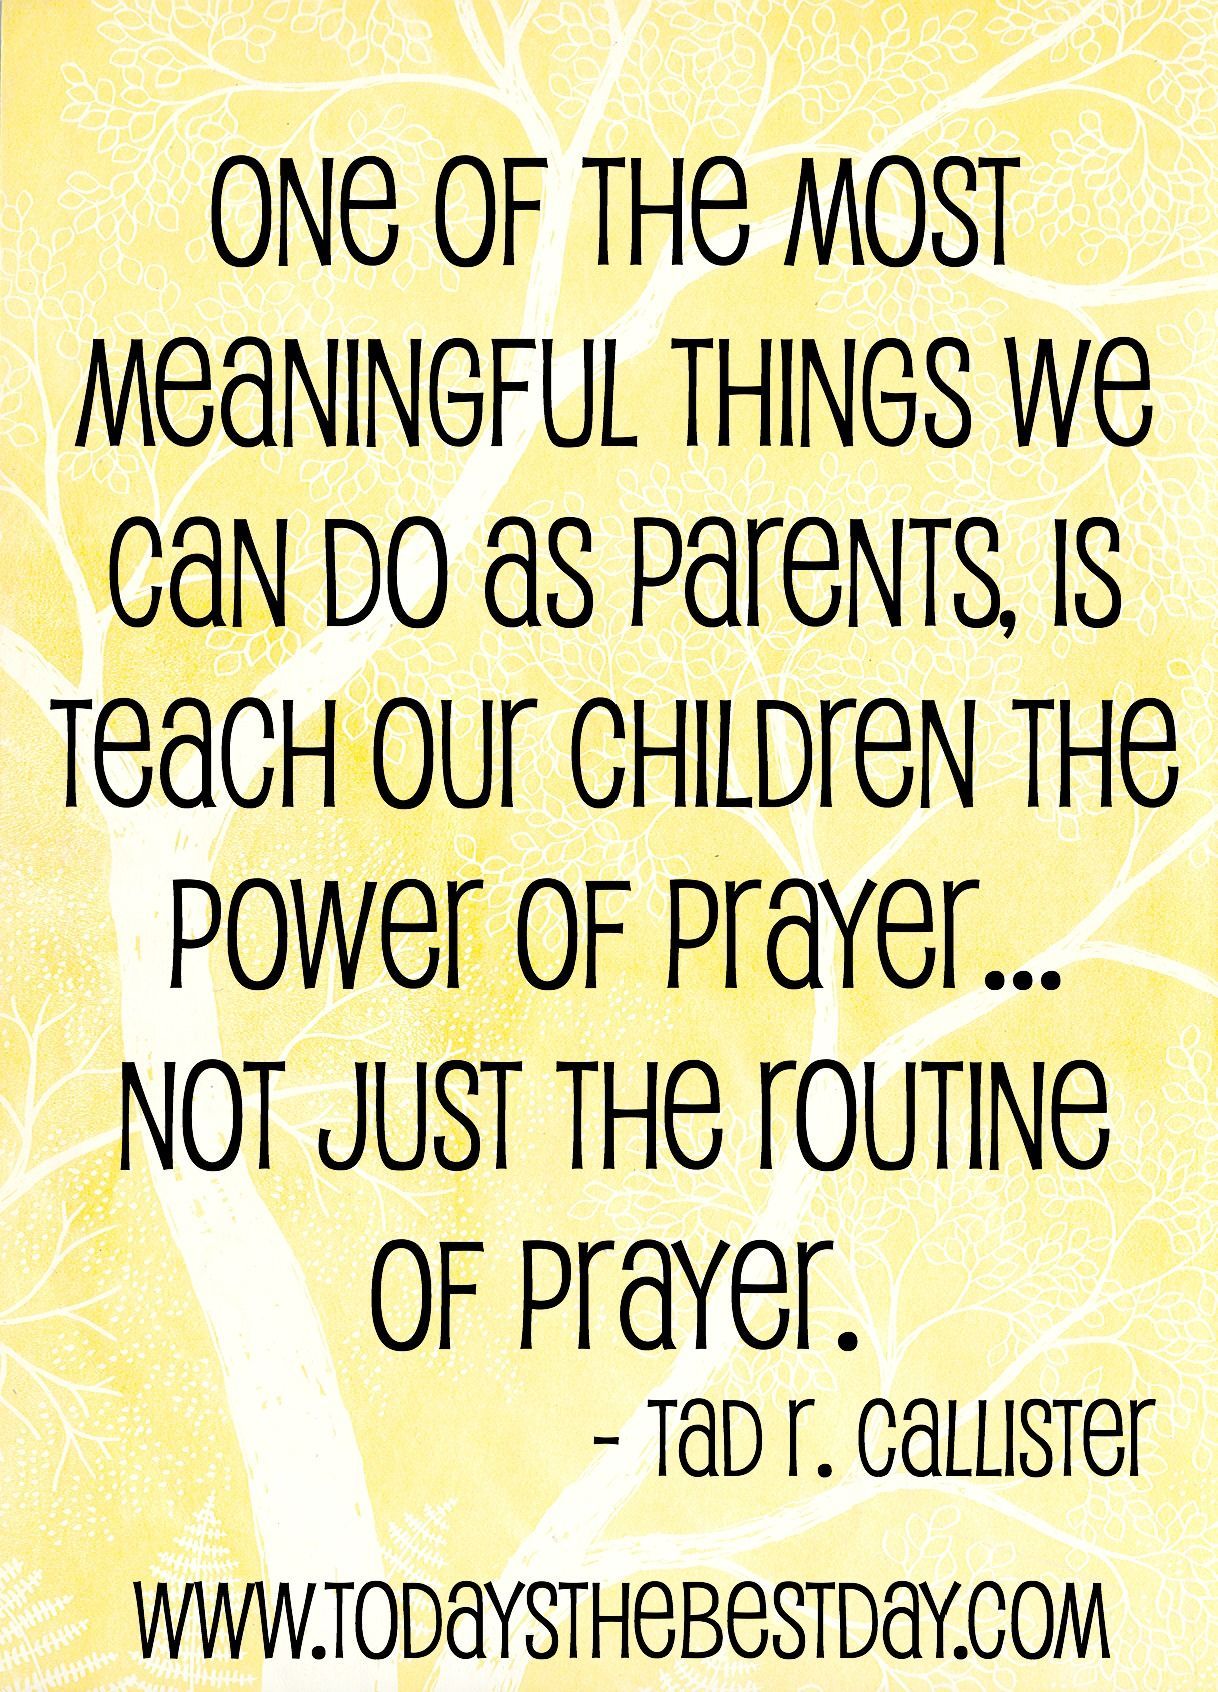 one of the most meaningful things we can as parents, is teach our children the power of prayer – not just the routine of prayer